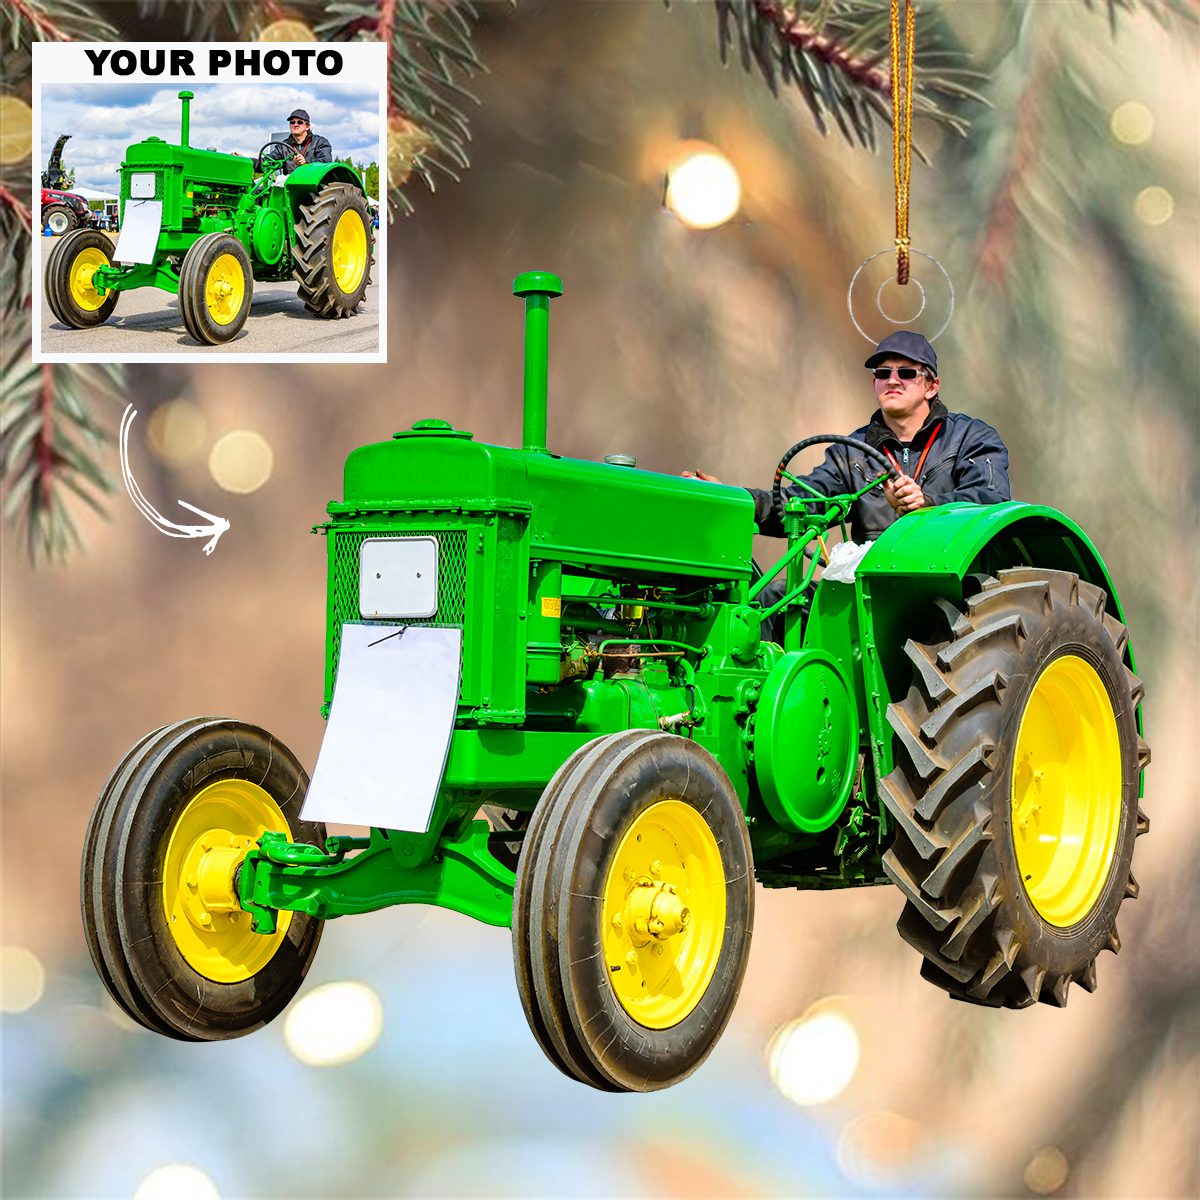 Tractor Ornament - Personalized Custom Photo Mica Ornament - Christmas Gift For Family Members